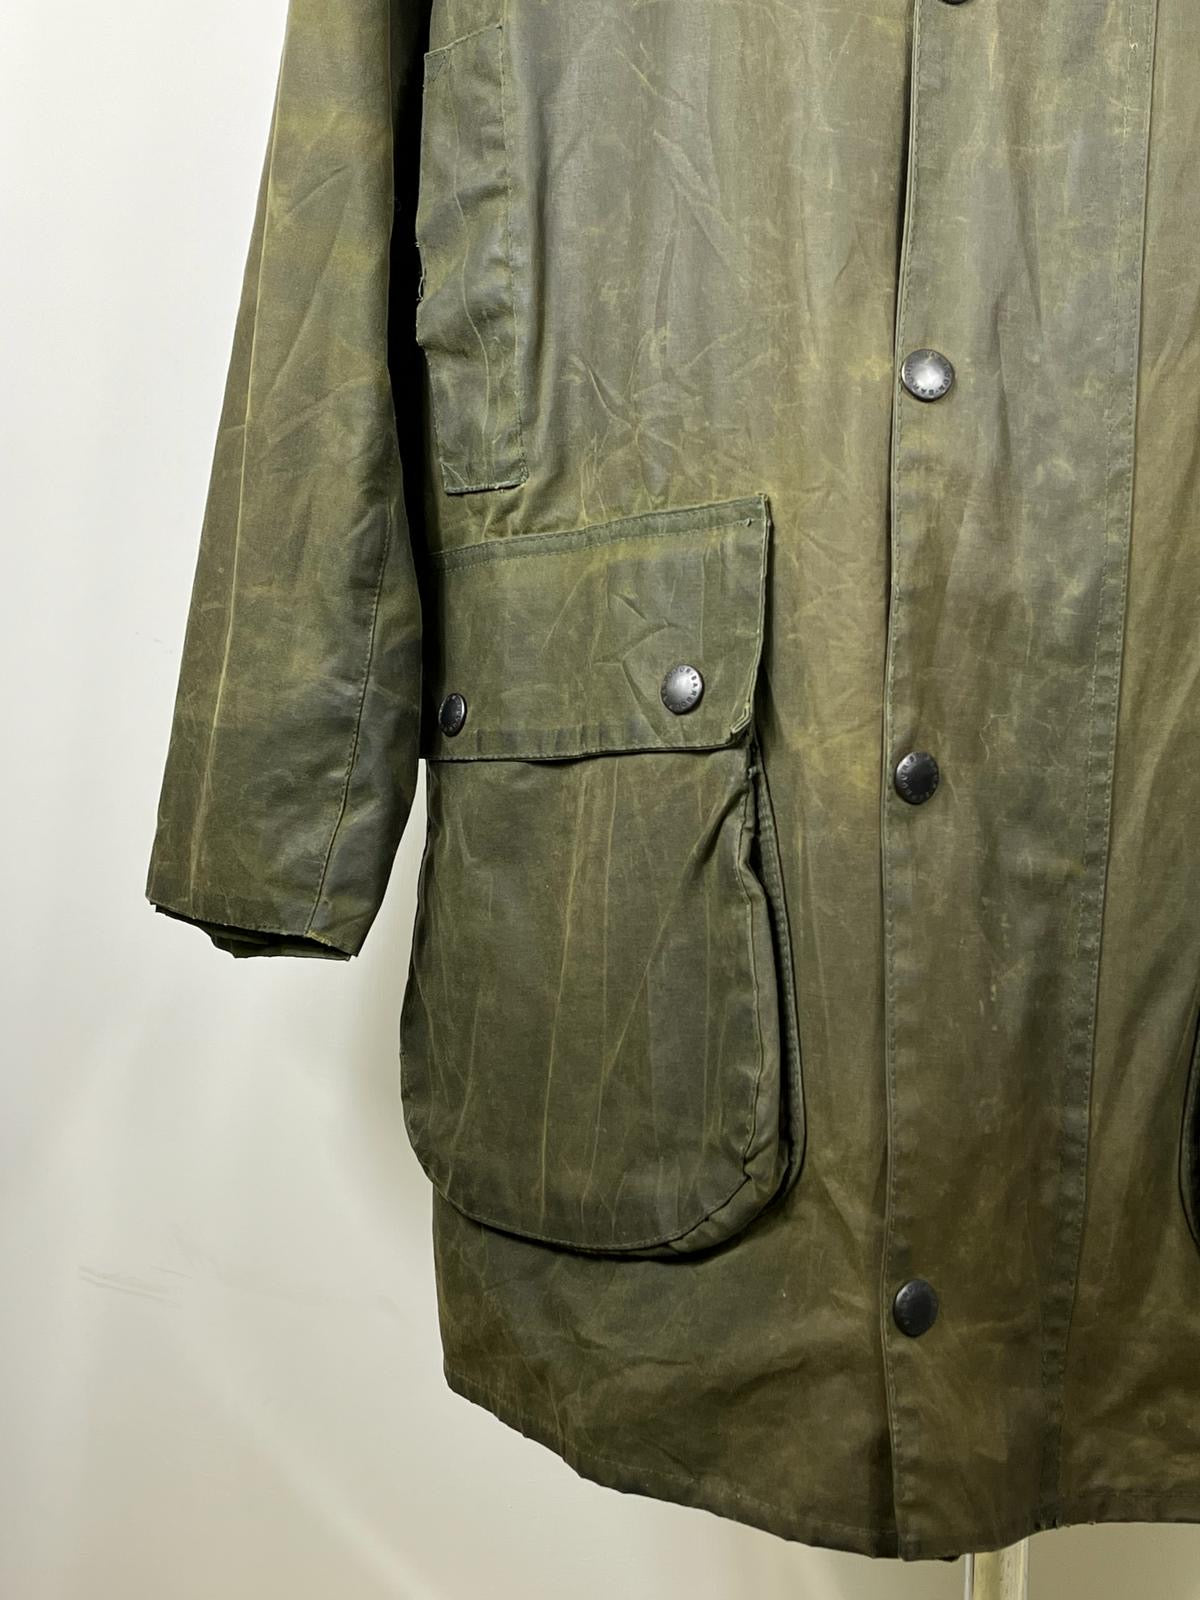 Giacca Barbour Vintage Northumbria C44/112cm-Green Northumbria Wax Jacket L/XL